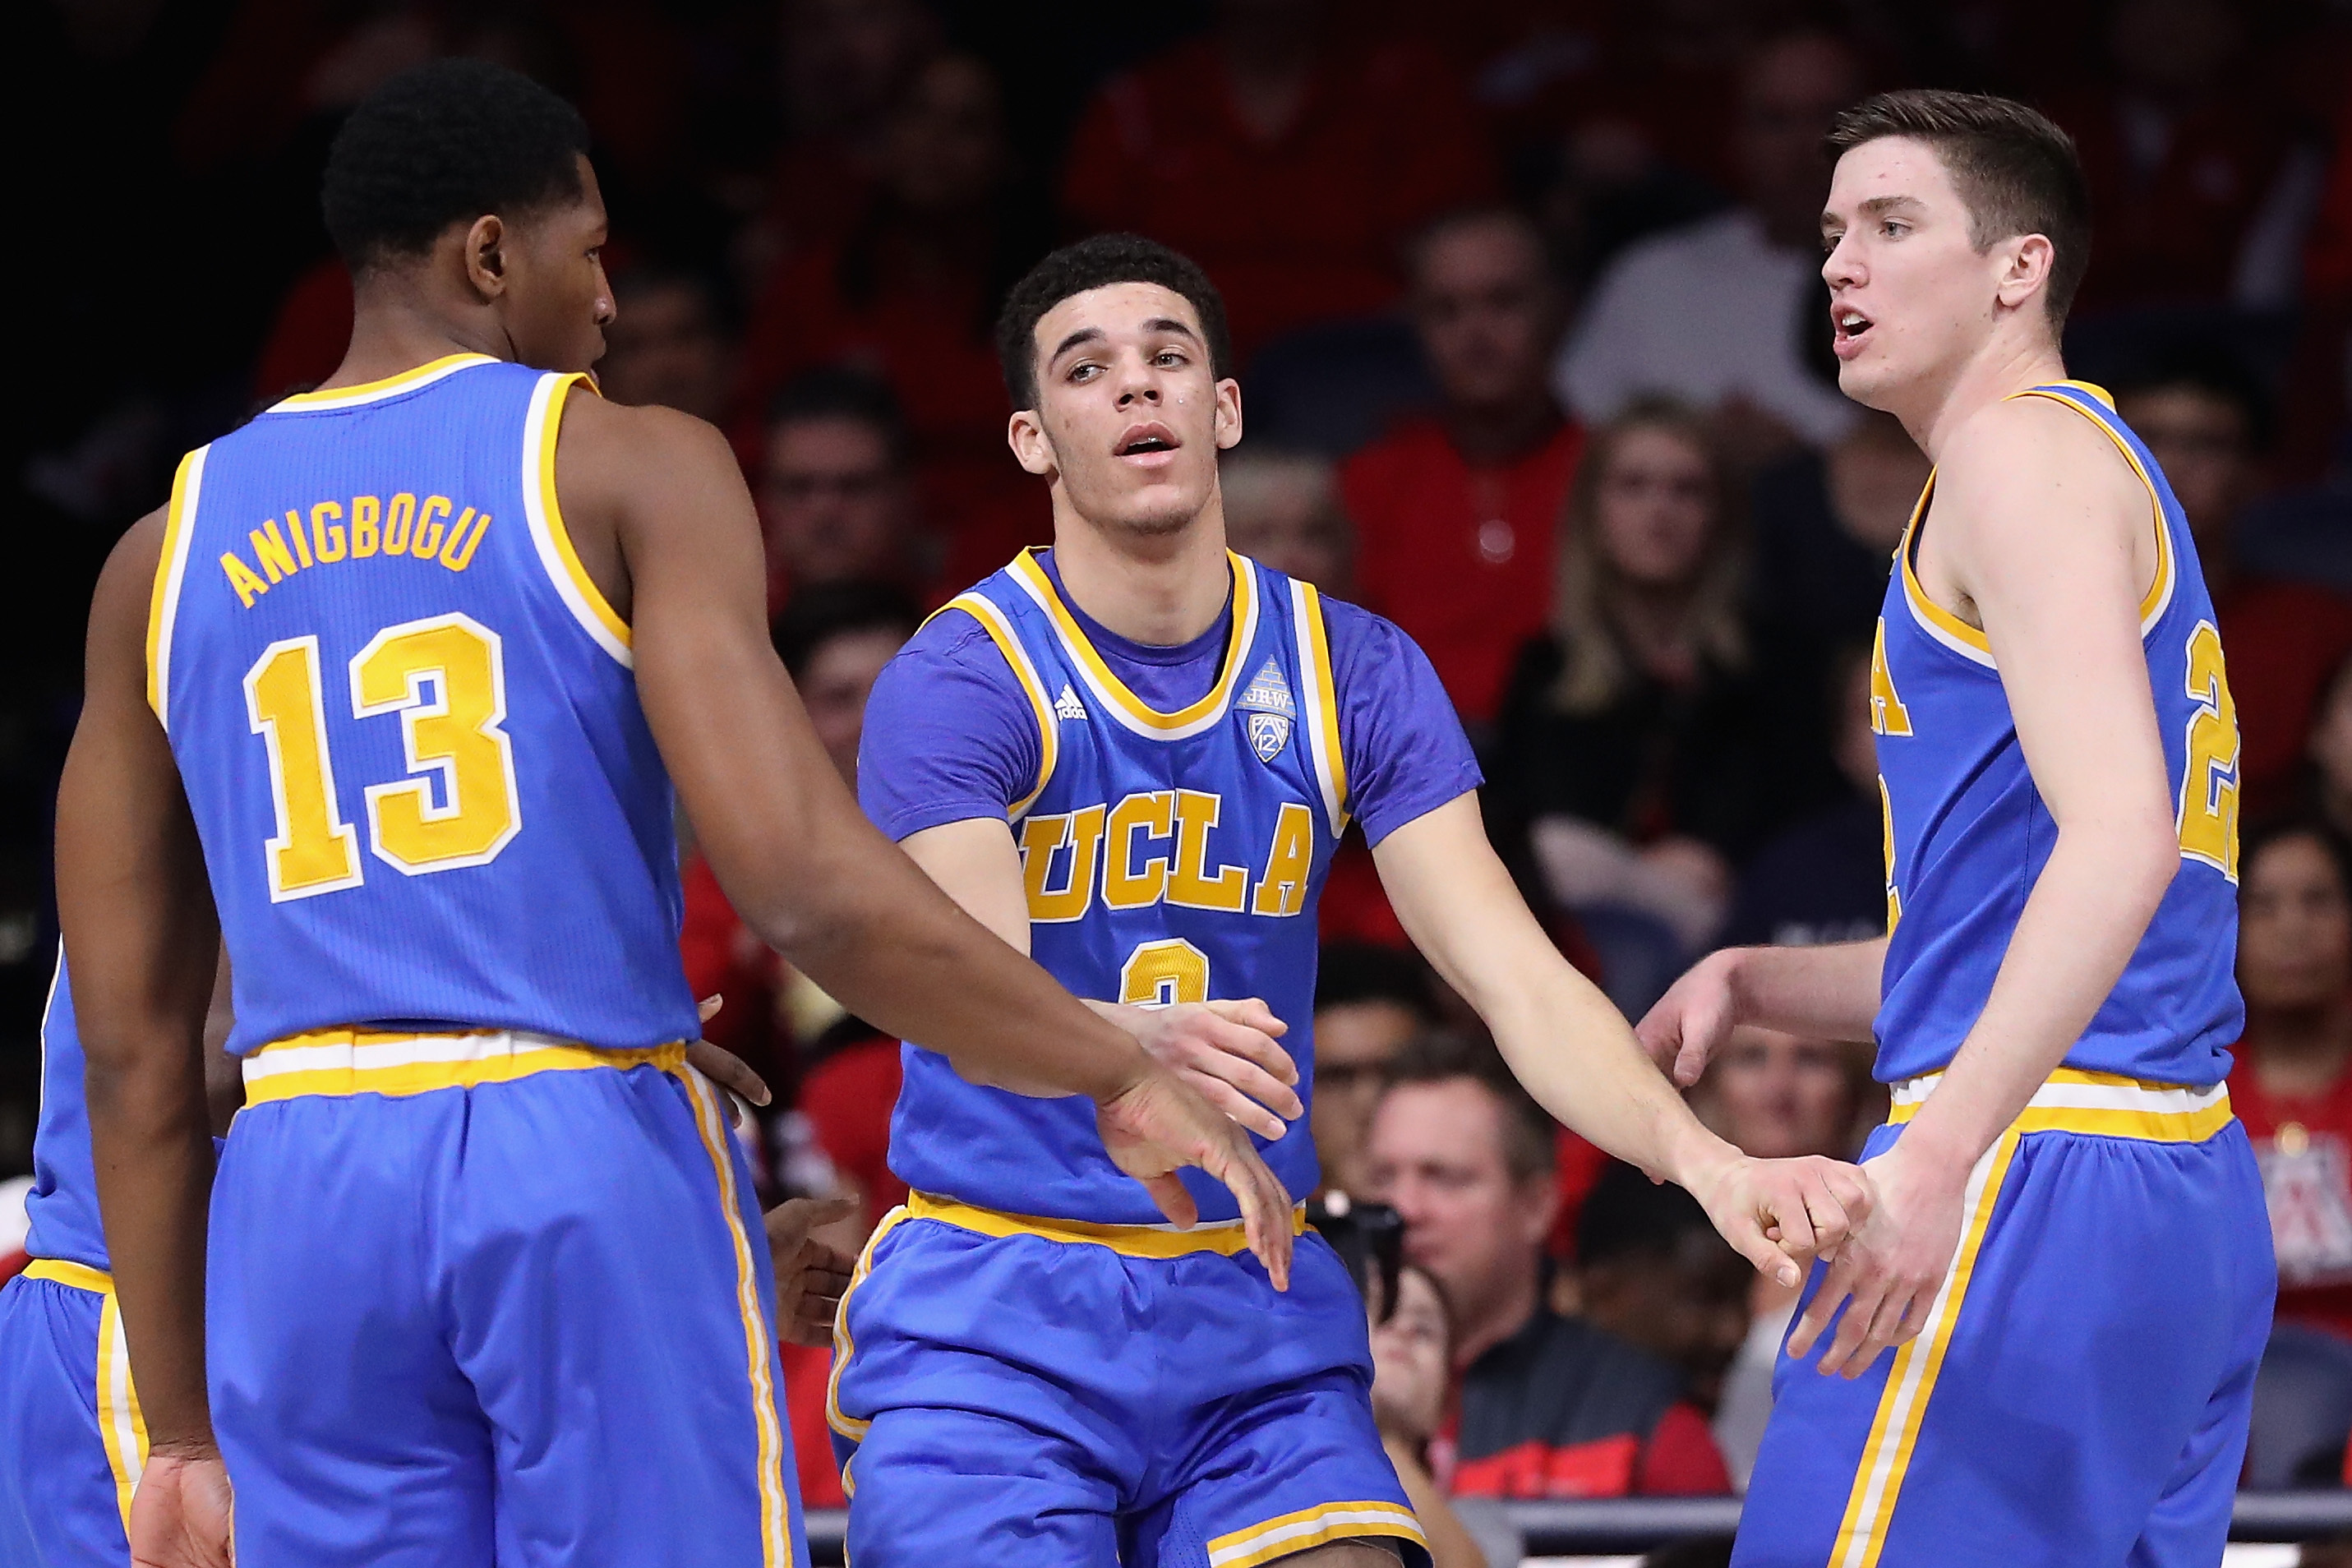 Steve Alford, Lonzo Ball overhaul UCLa's offense - Sports Illustrated